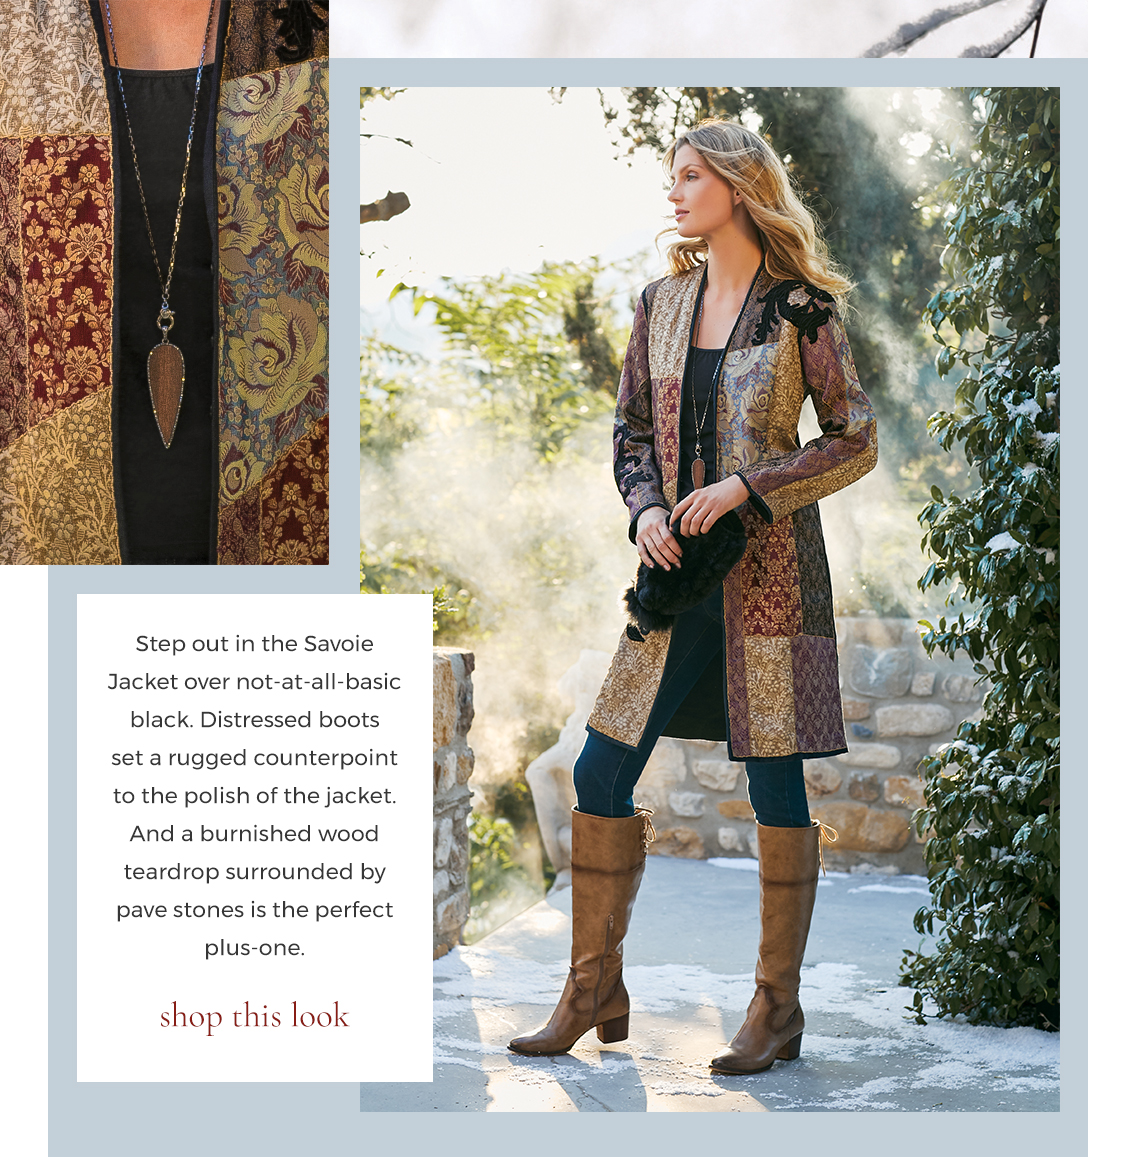 Step out in the Savoie Jacket over not-at-all-basic black. Distressed boots set a rugged counterpoint to the polish of the jacket. And a burnished wood teardrop surrounded by pave stones is the perfect plus-one. Shop This Look